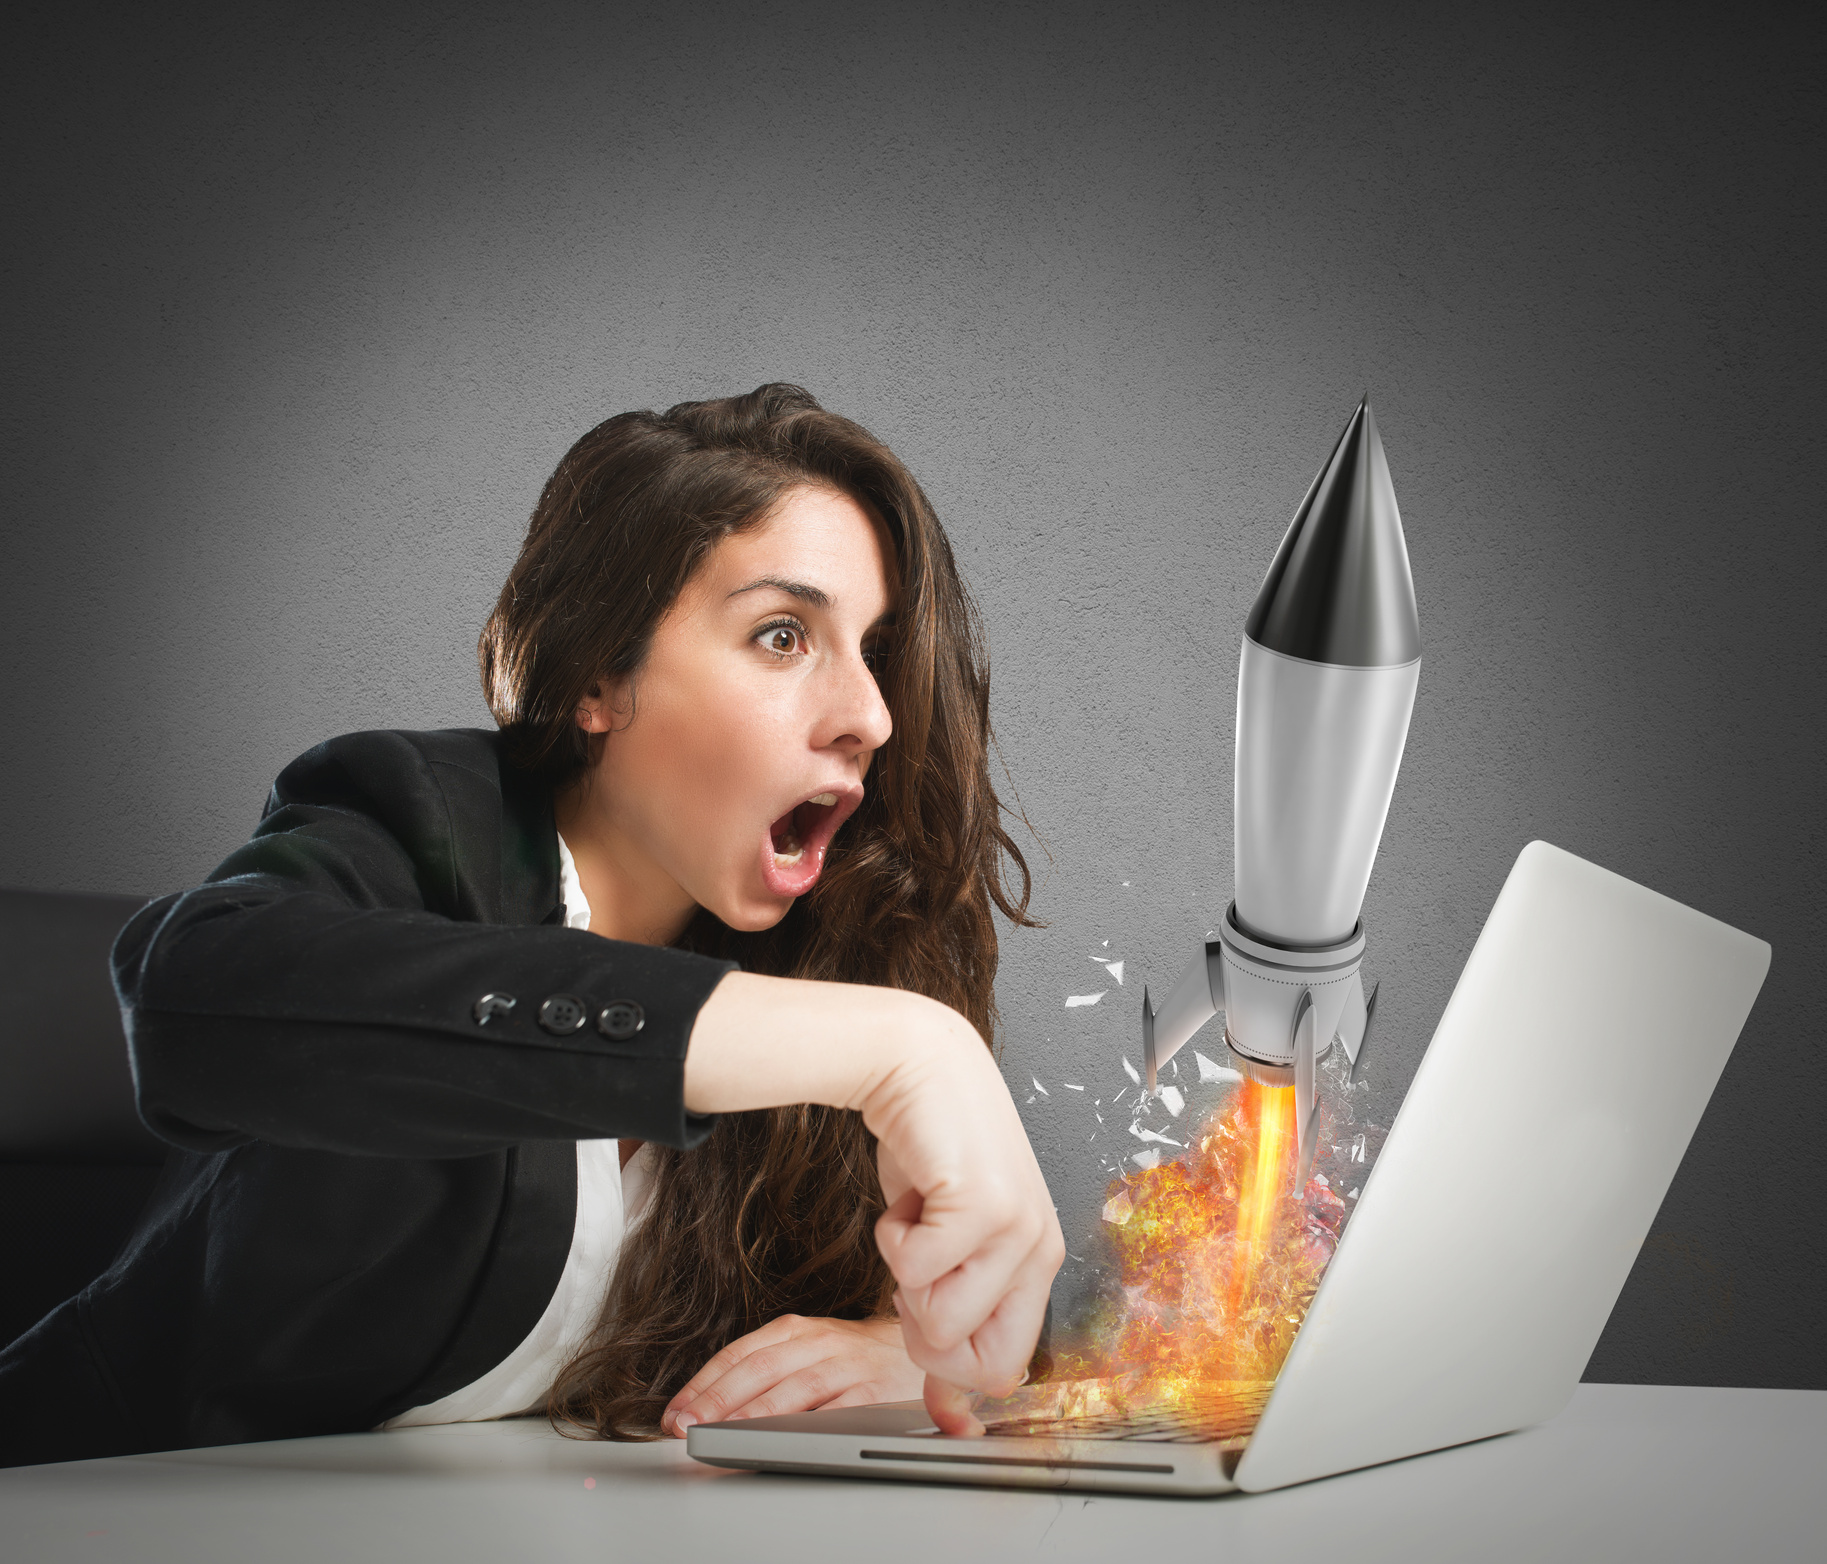 Businesswoman Launches Rocket from a Laptop. Concept of Company Startup